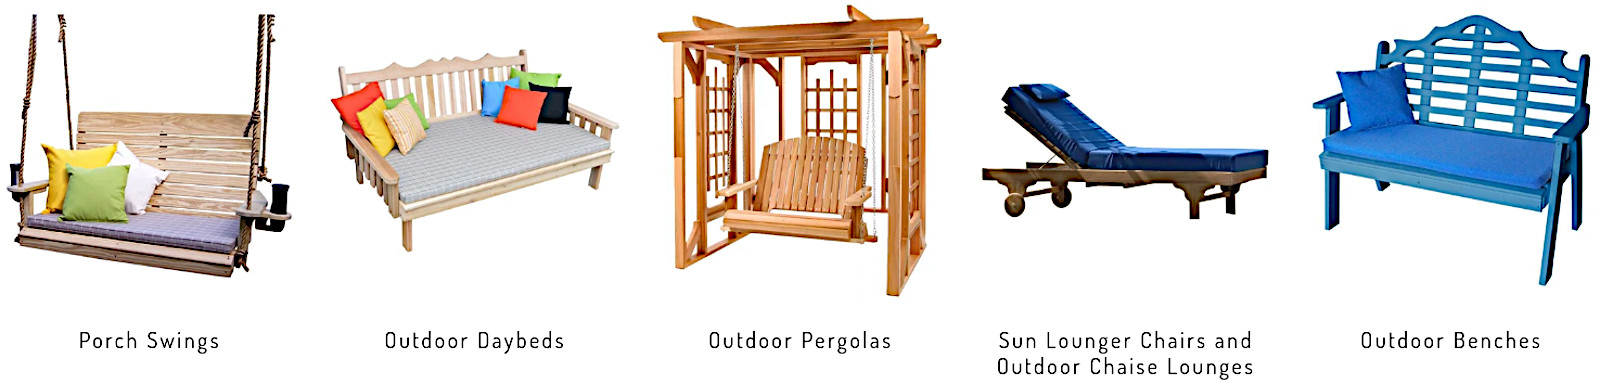 outdoor furniture discounted